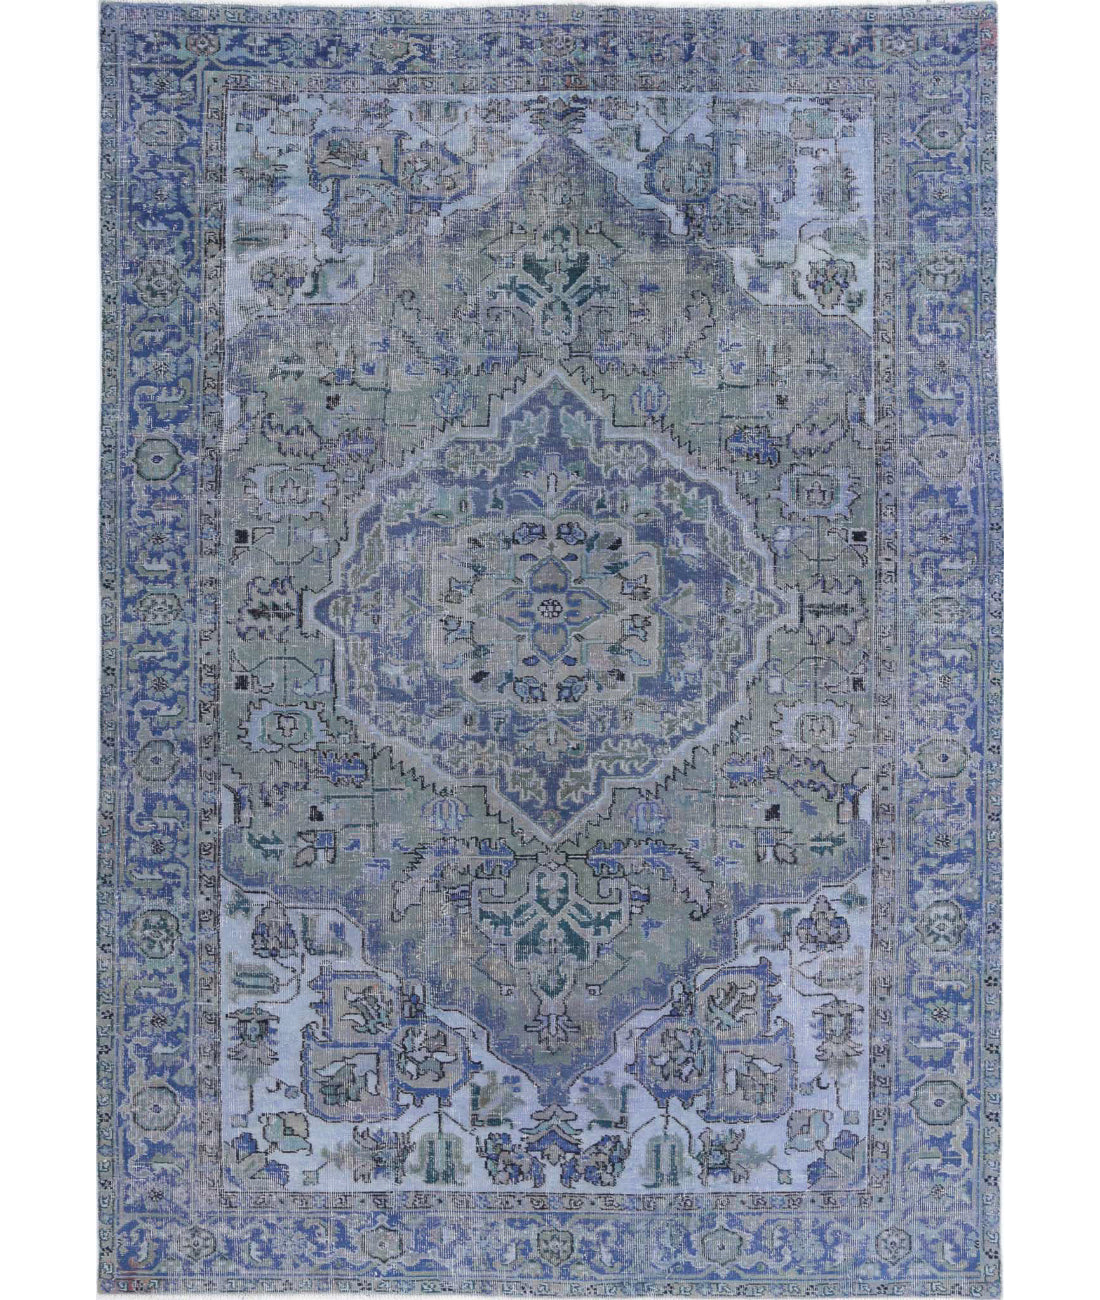 Hand Knotted Vintage Persian Heriz Wool Rug - 6'1'' x 8'9'' 6'1'' x 8'9'' (183 X 263) / Blue / Blue